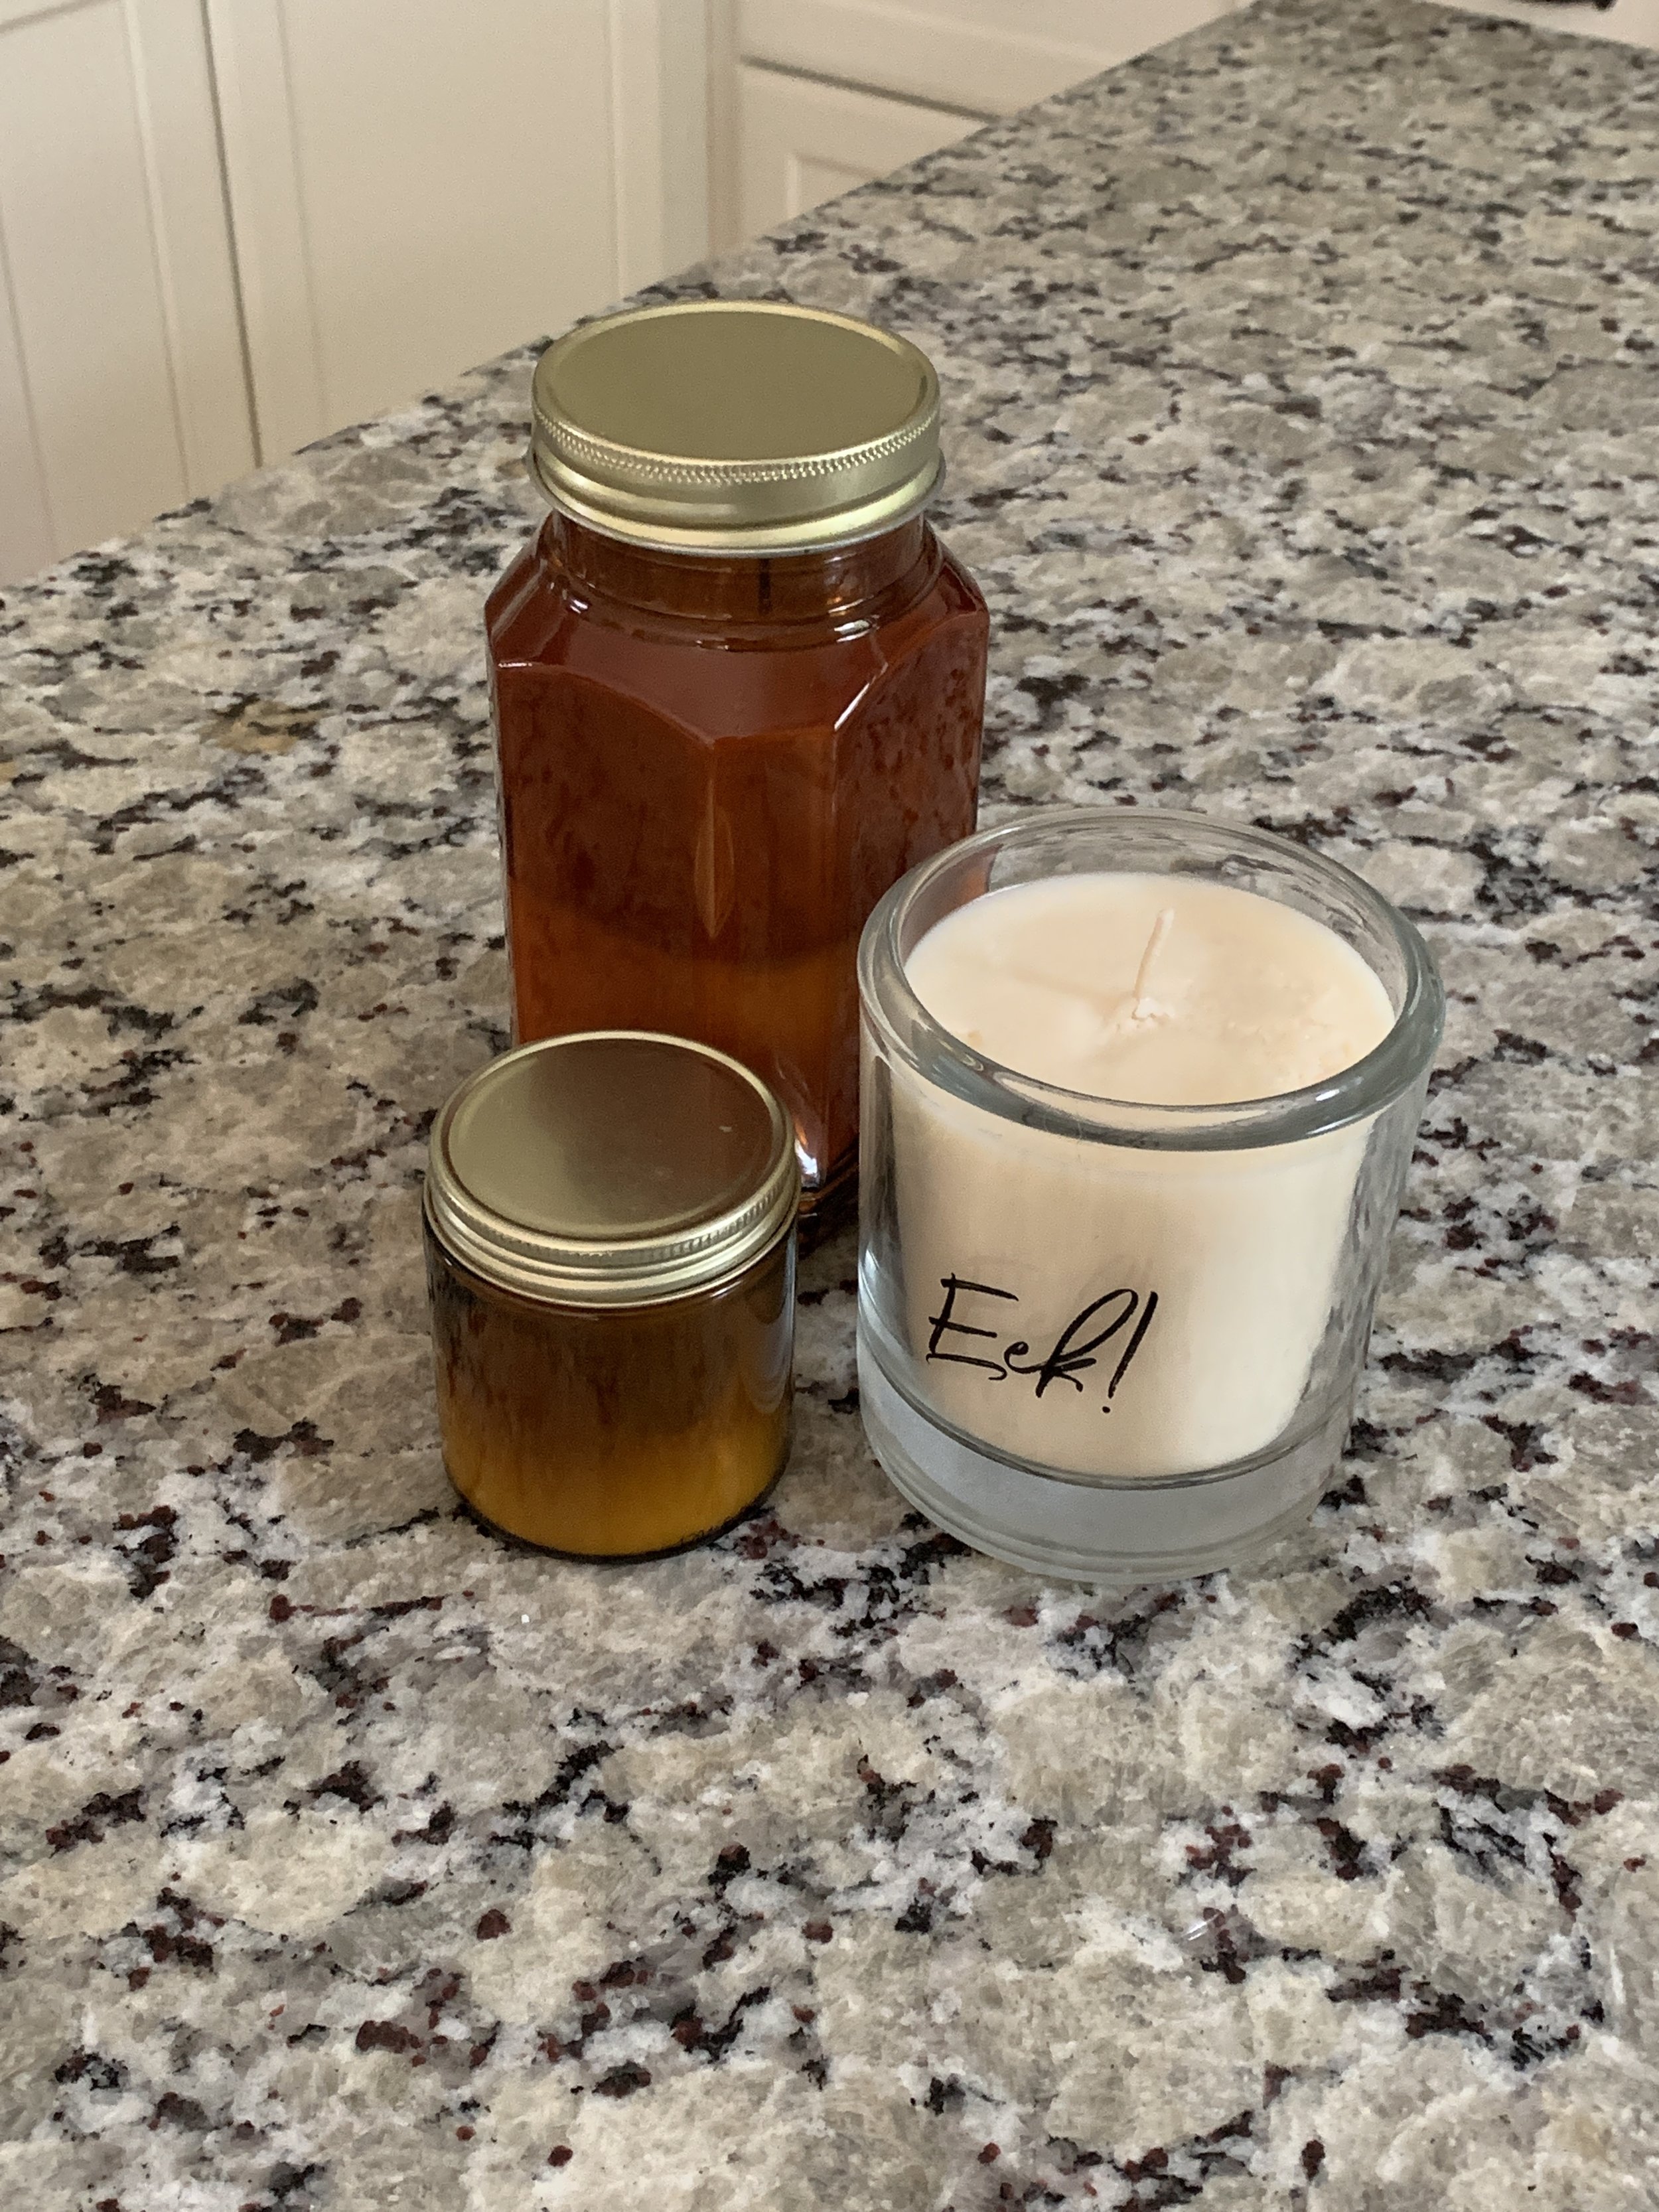 Any good ideas on how to reuse candle jars? : r/ZeroWaste